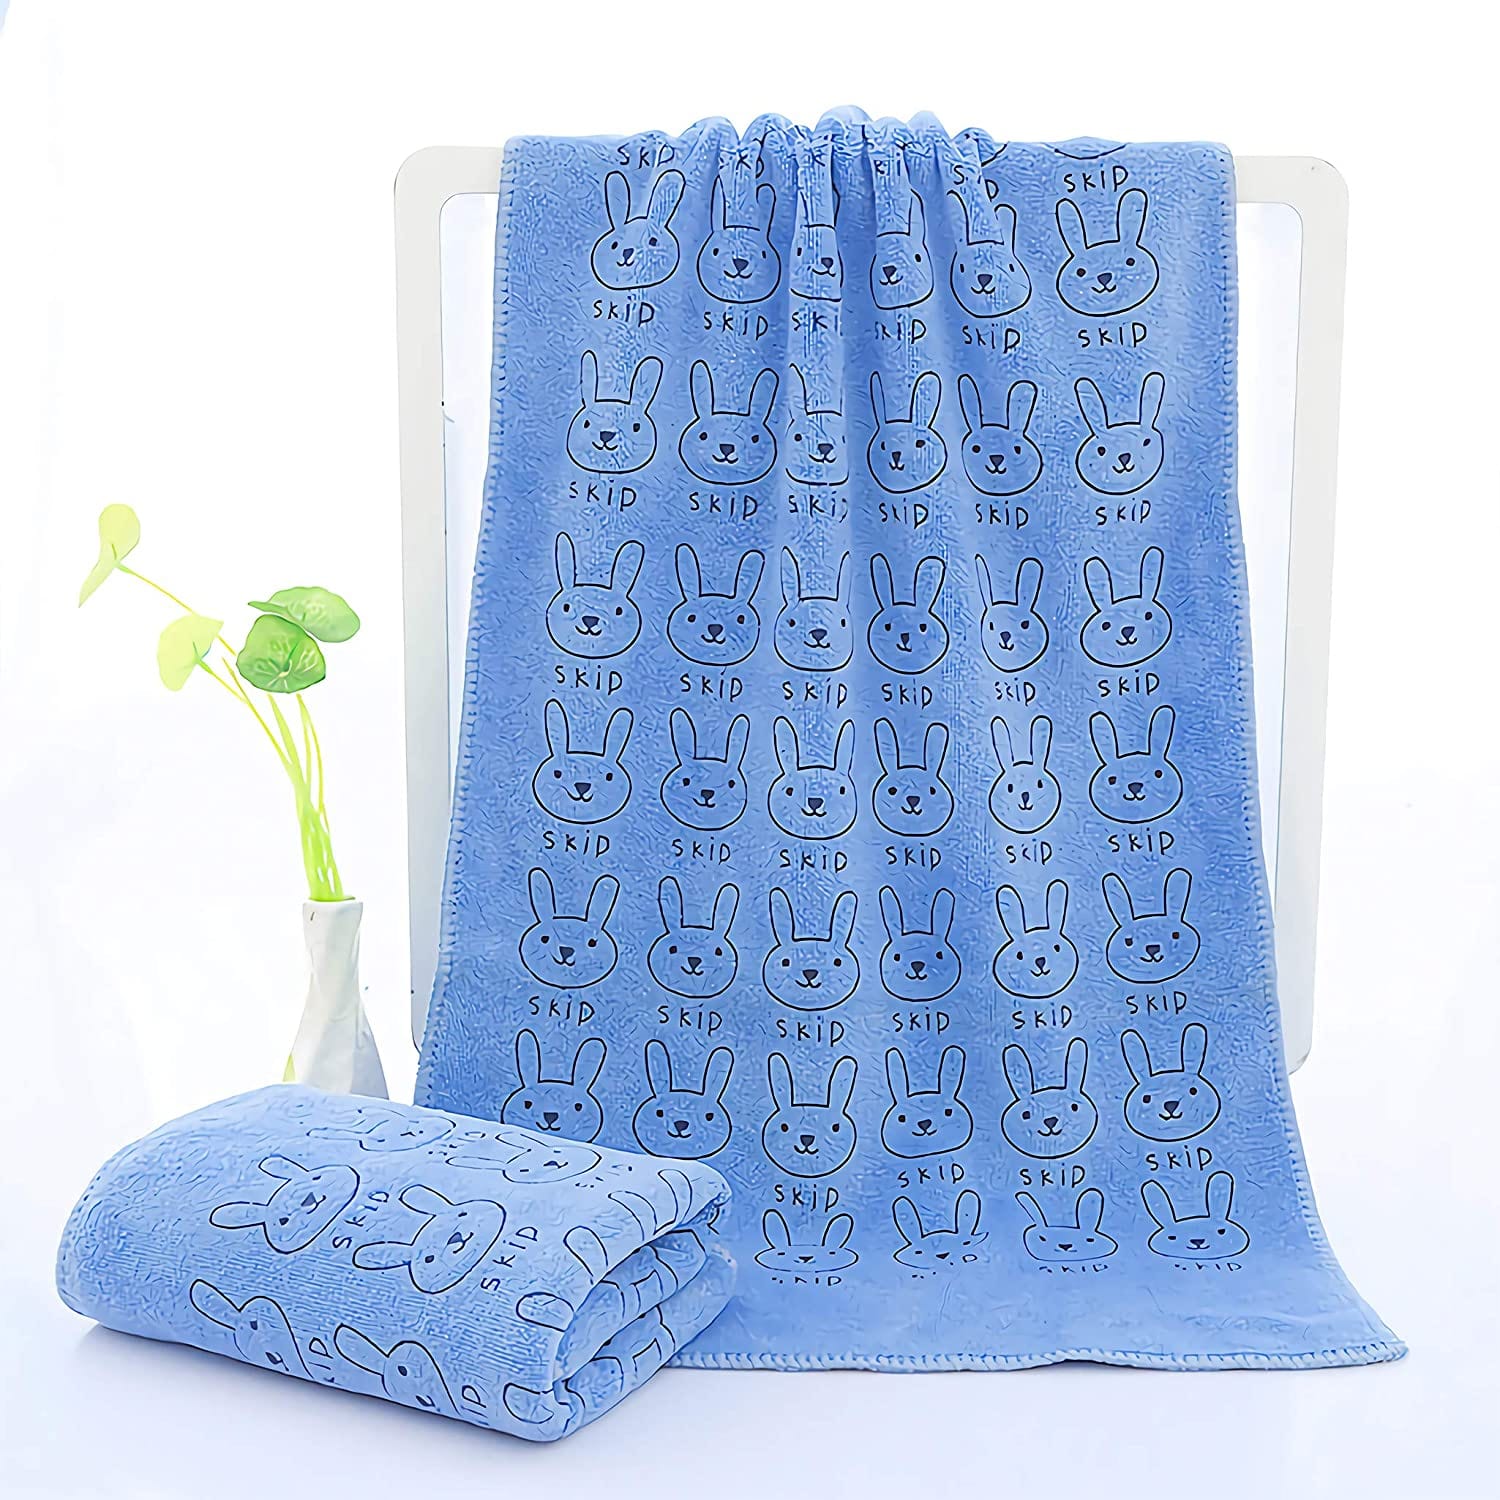 KUTKUT Dog Towel, Looluuloo Microfiber Drying Towels for Dog, Dog Bath Towel, Beach Towel, Absorbent Towel Suitable for Small and Medium Dogs (Blue: 140 x 70cm)… - kutkutstyle